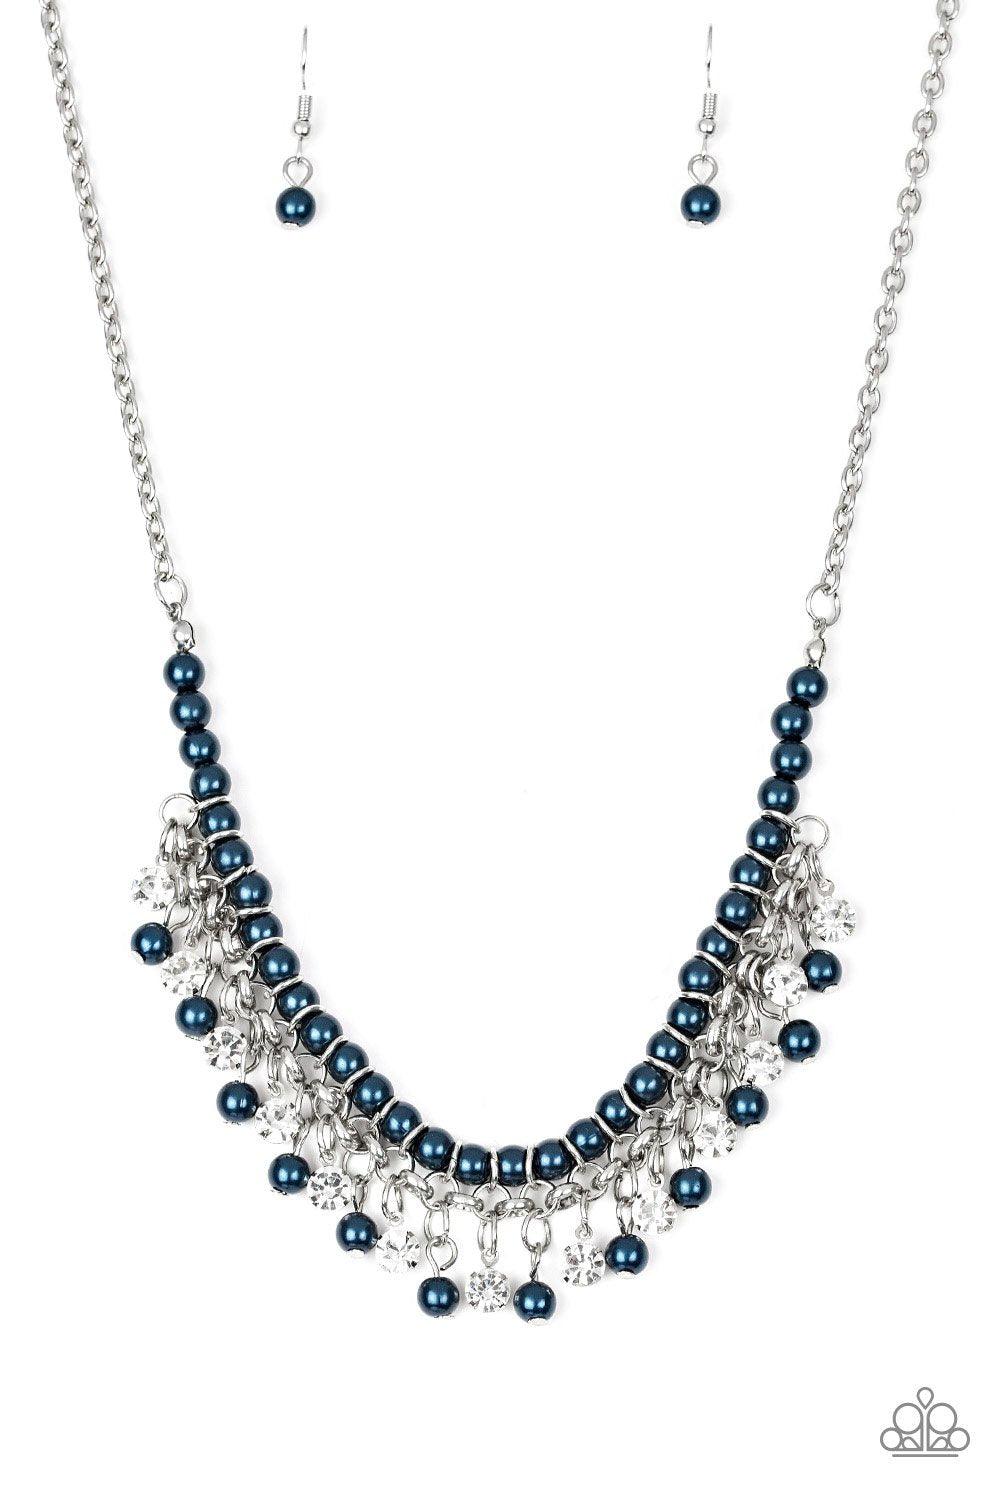 A Touch of CLASSY Blue Pearl and White Rhinestone Necklace - Paparazzi Accessories - lightbox -CarasShop.com - $5 Jewelry by Cara Jewels